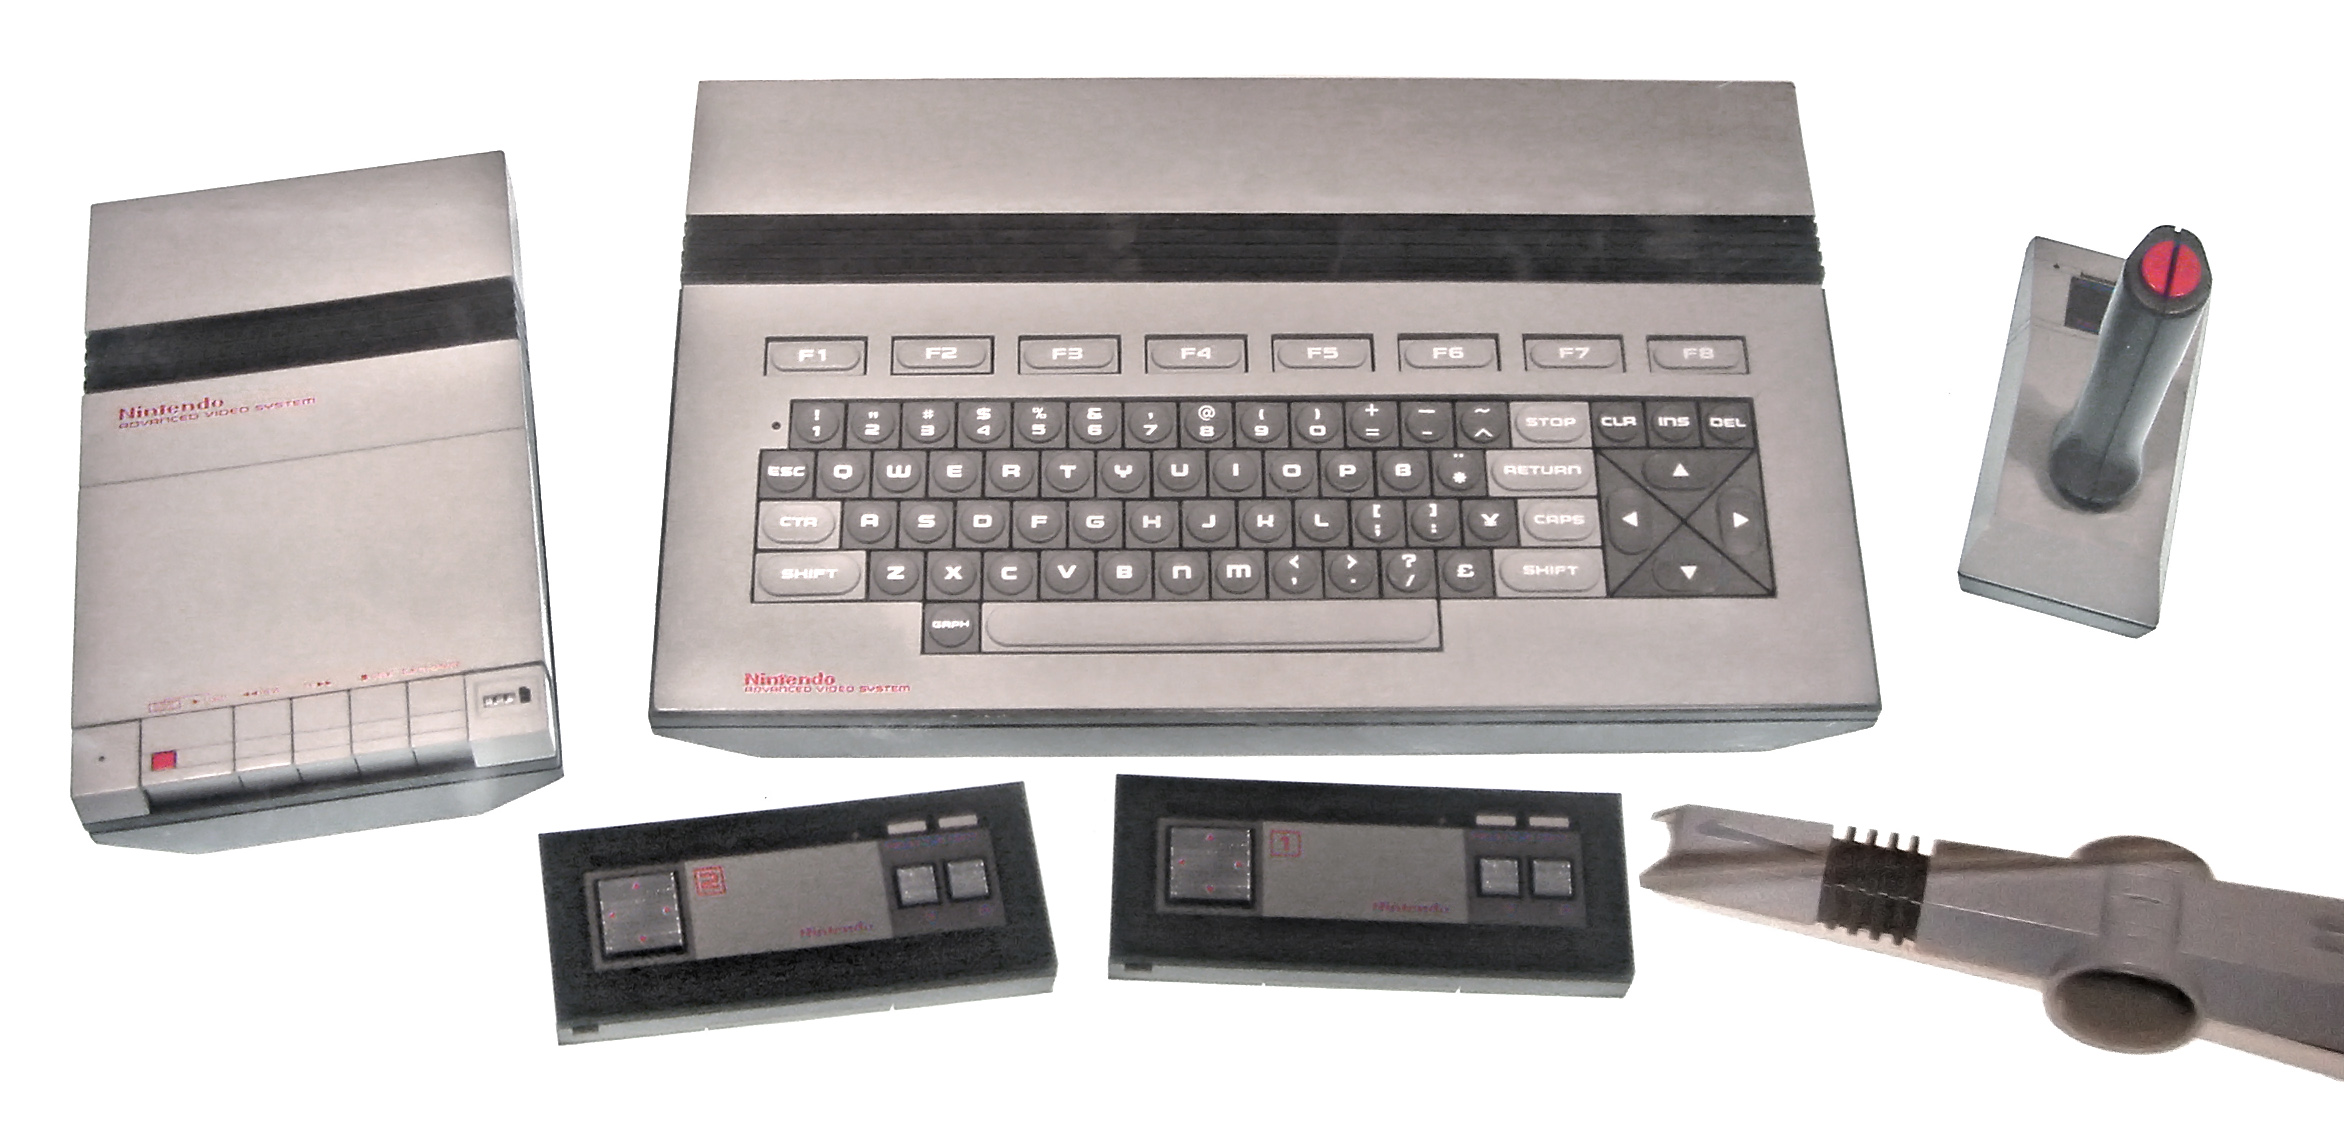 Nintendo_Advanced_Video_System_(retouched)